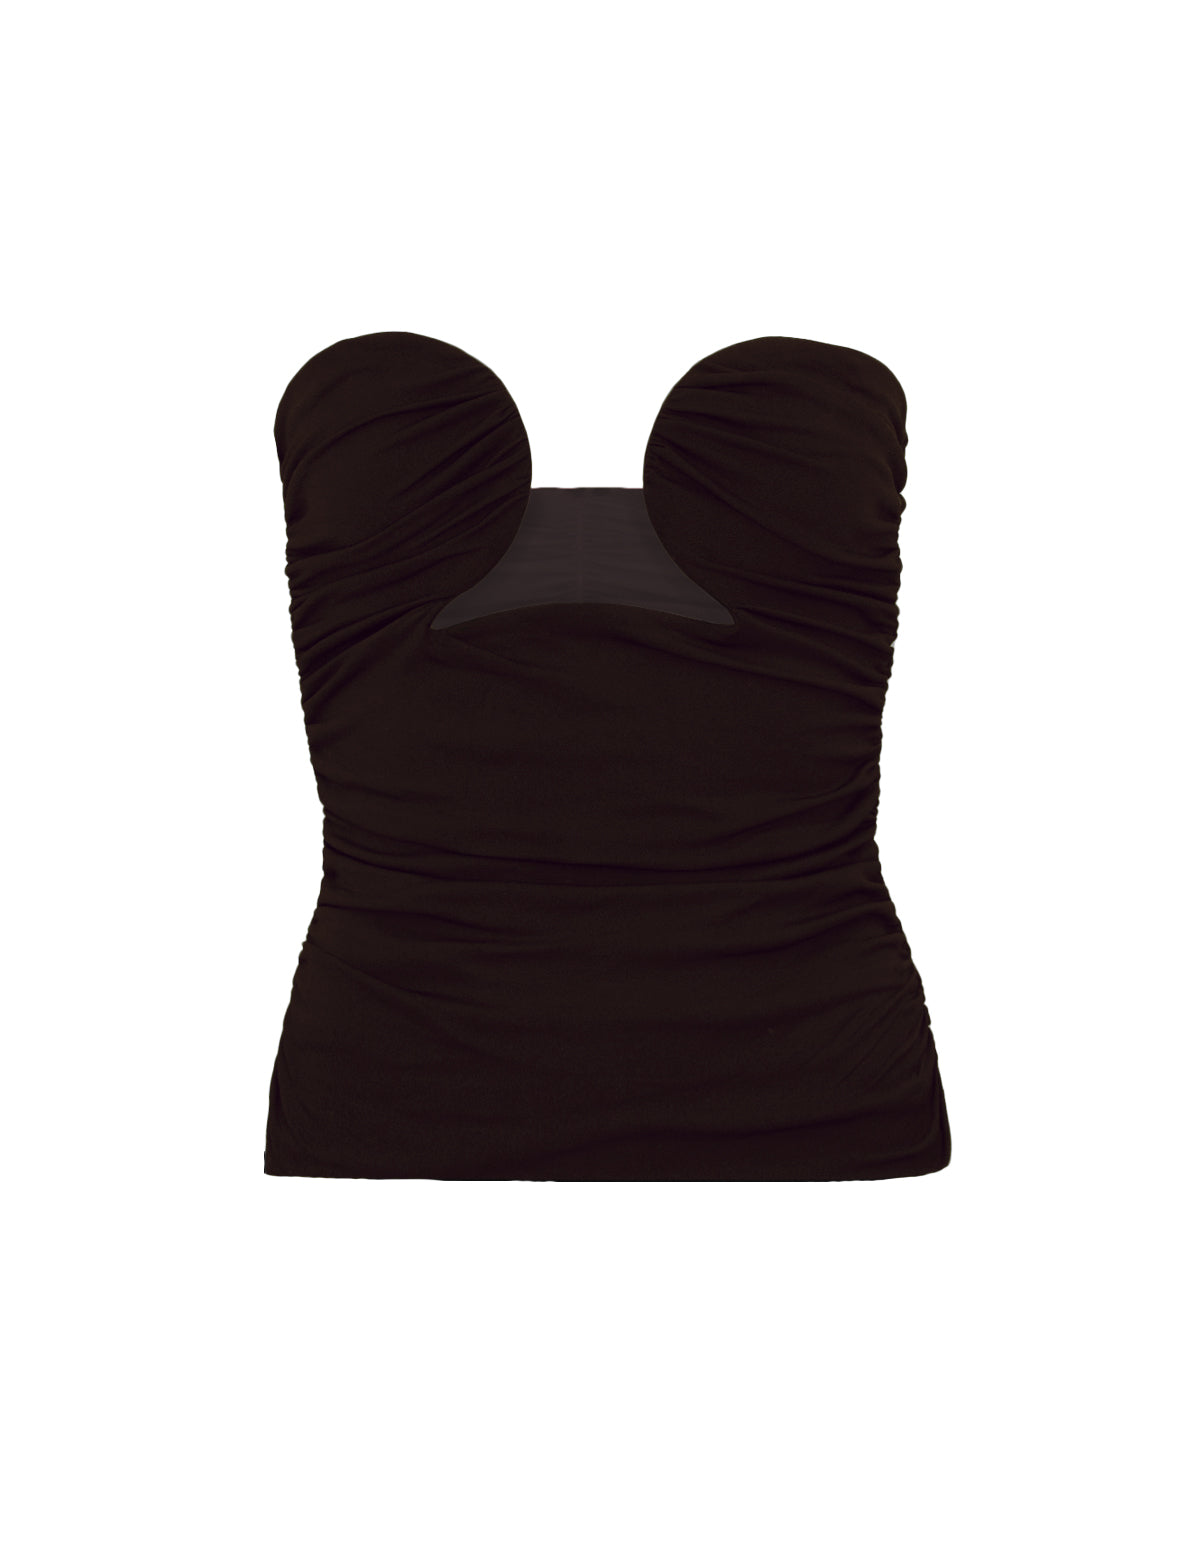 Dominique Bustier Top in Chicory-BESTSELLER